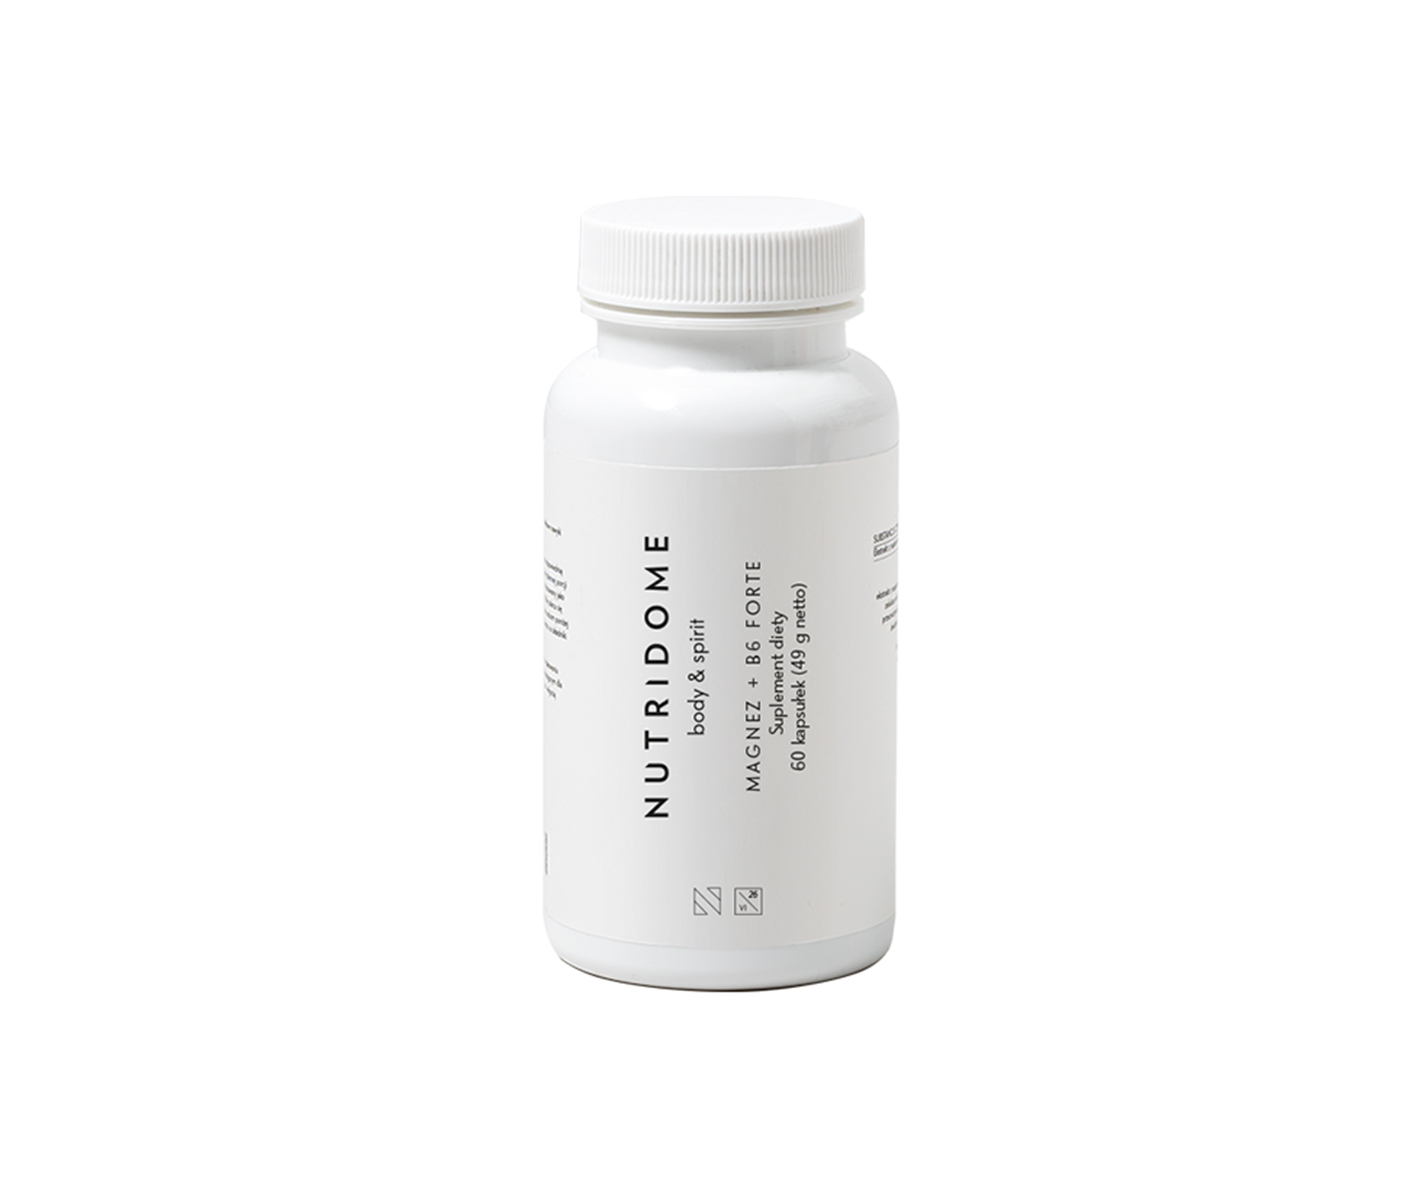 MAGNESIUM + B6 FORTE, supplement with magnesium citrate for cramps, including calves